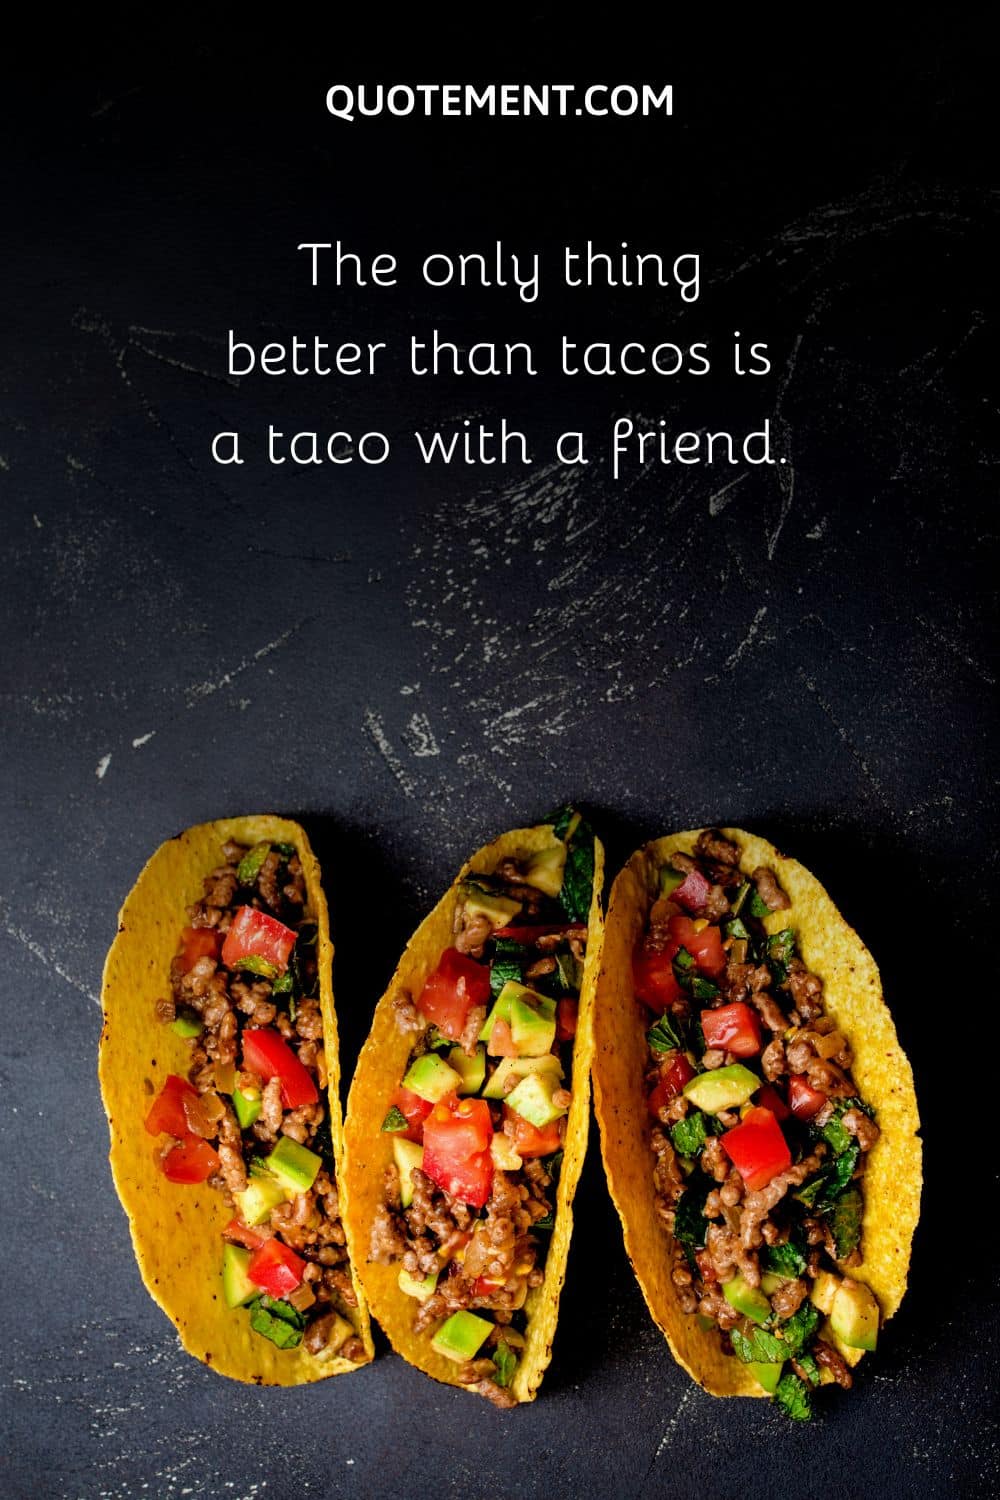 The only thing better than tacos is a taco with a friend